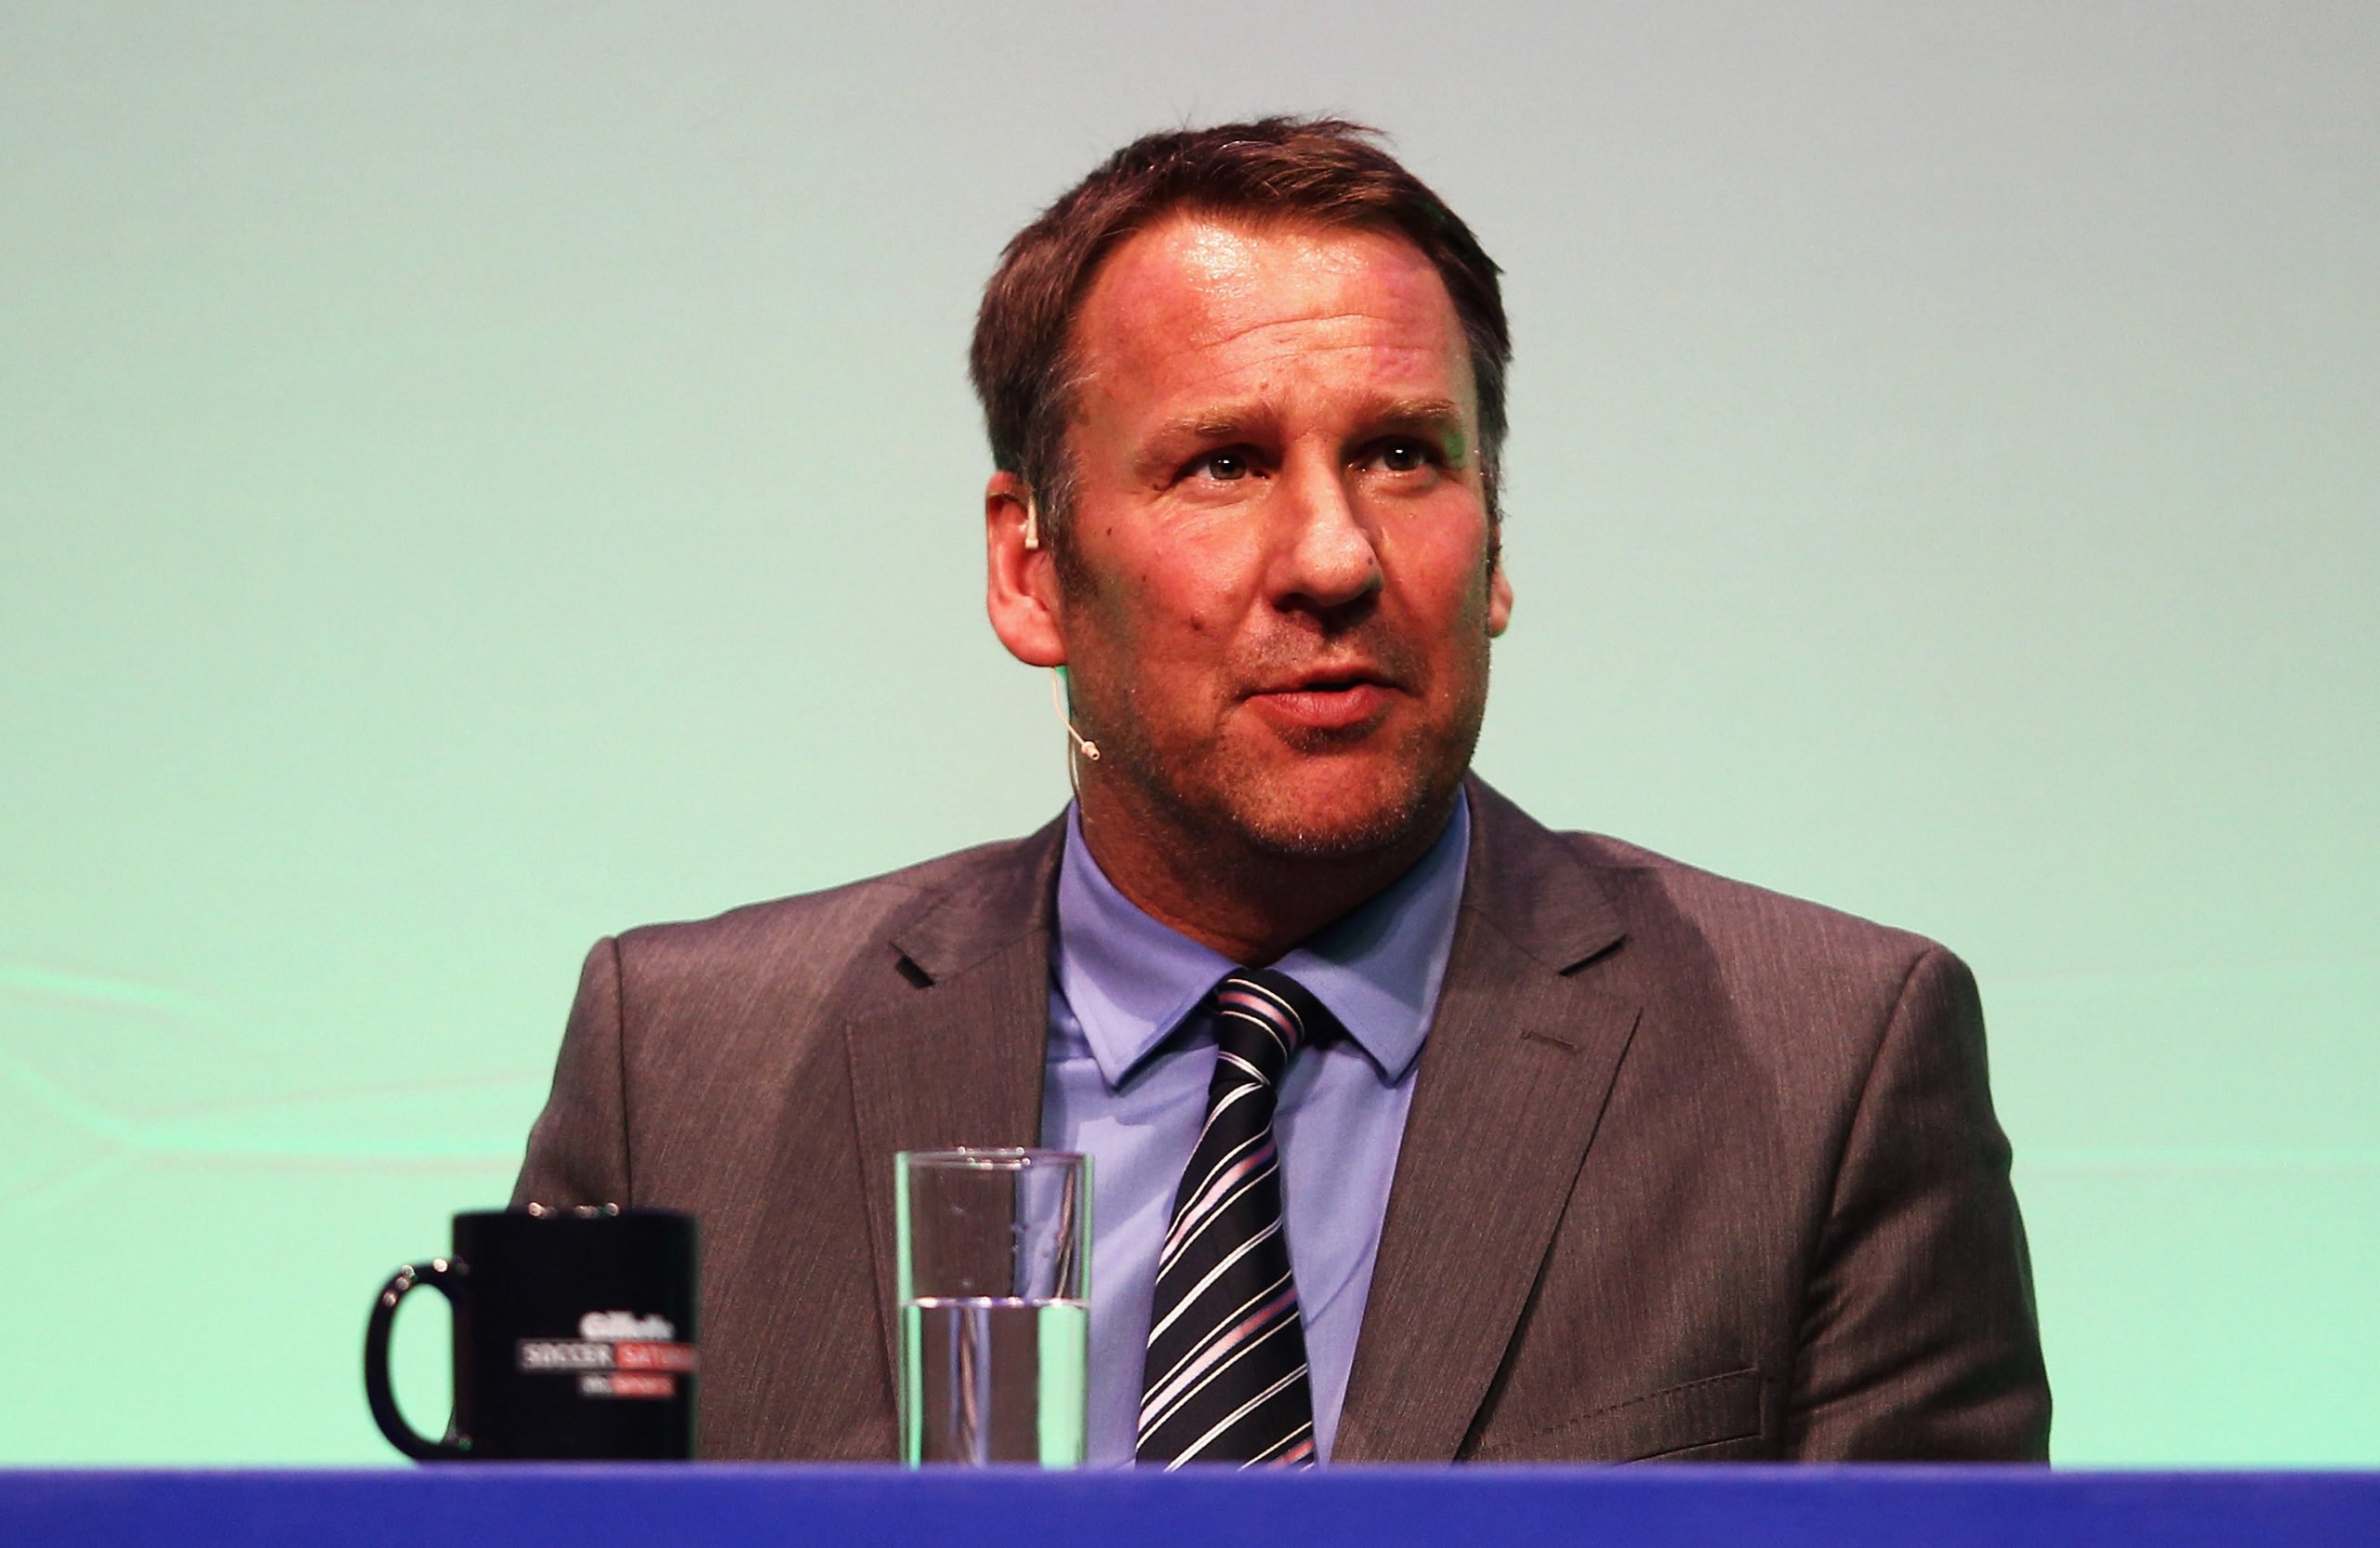 ’So fit’: Paul Merson totally amazed by athletic Chelsea star who’s turning into a ‘superstar’